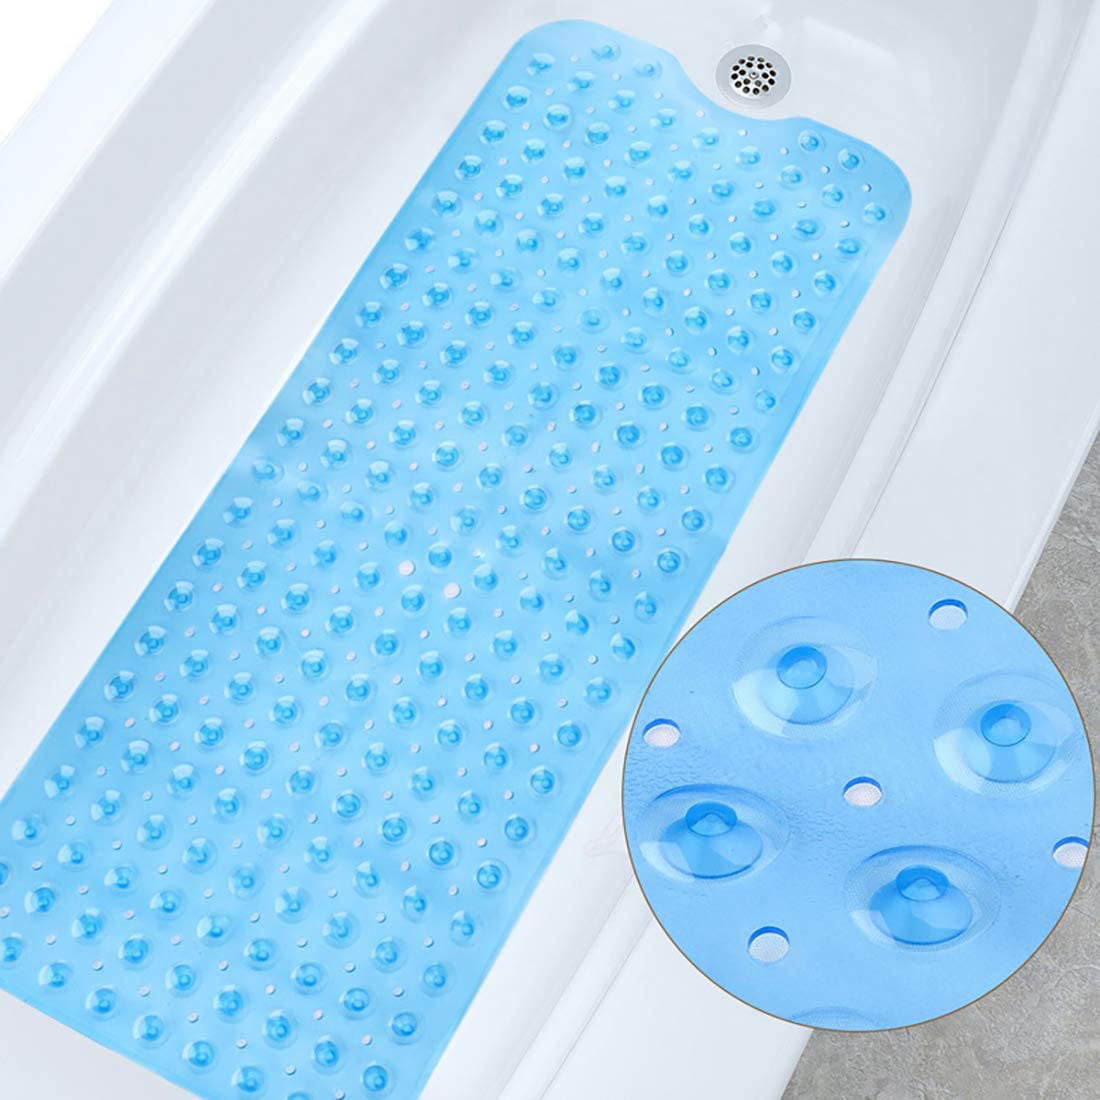 Zsroot Gray Shower Mats Non Slip Bathtub Mat with Suction Cups & Drain Holes 16x35 in Anti Mould Machine Washable Antibacterial,Safety Anti Slip Bath Mat for Kids And Elderly 